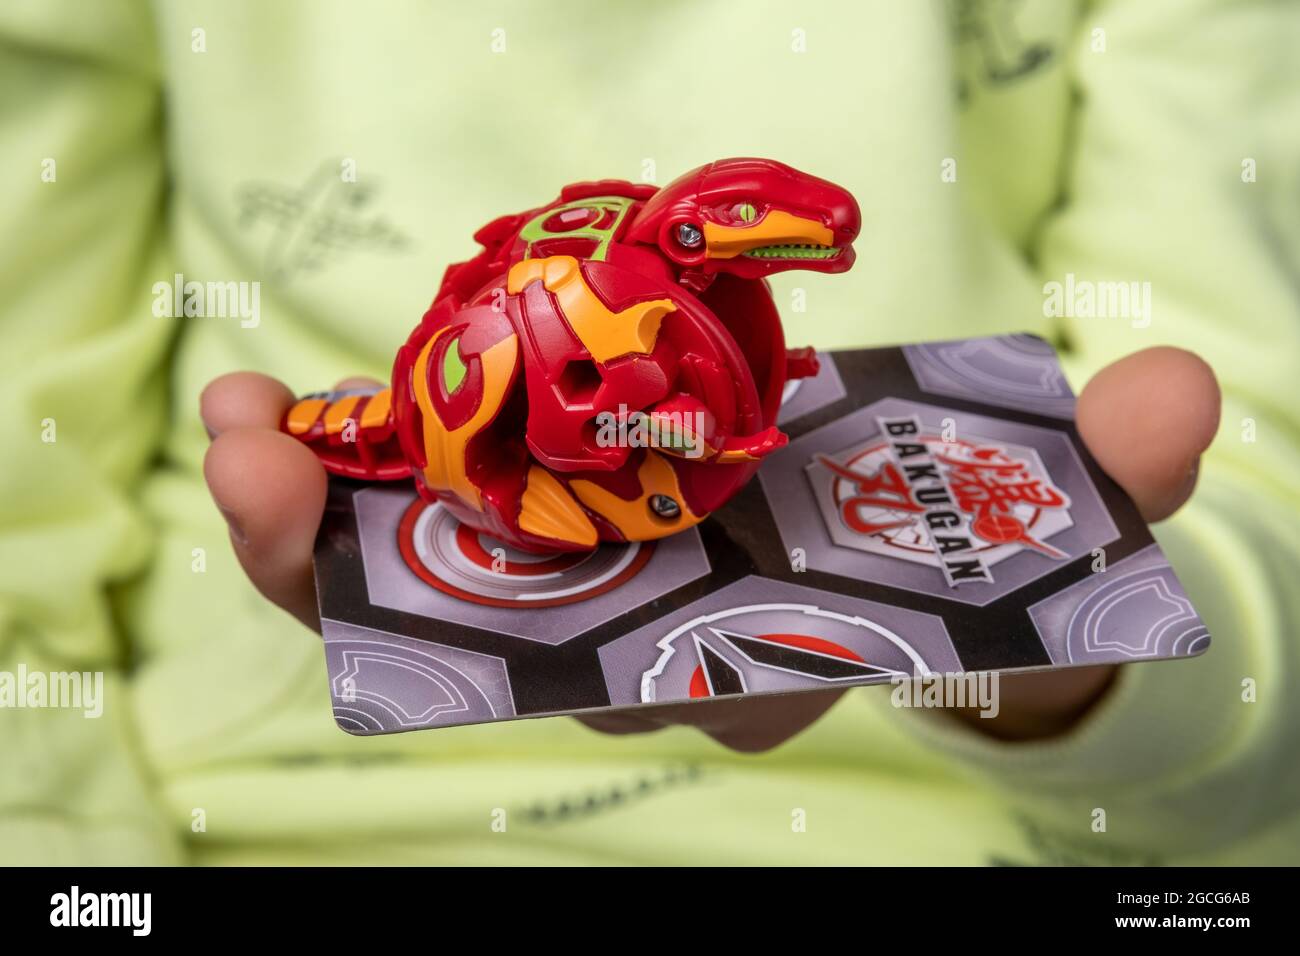 Bakugan Ball toy. Toy transformed in a dragon shape, hold in child's hand with magnetic card. Stafford, United Kingdom, August 8, 2021 Stock Photo